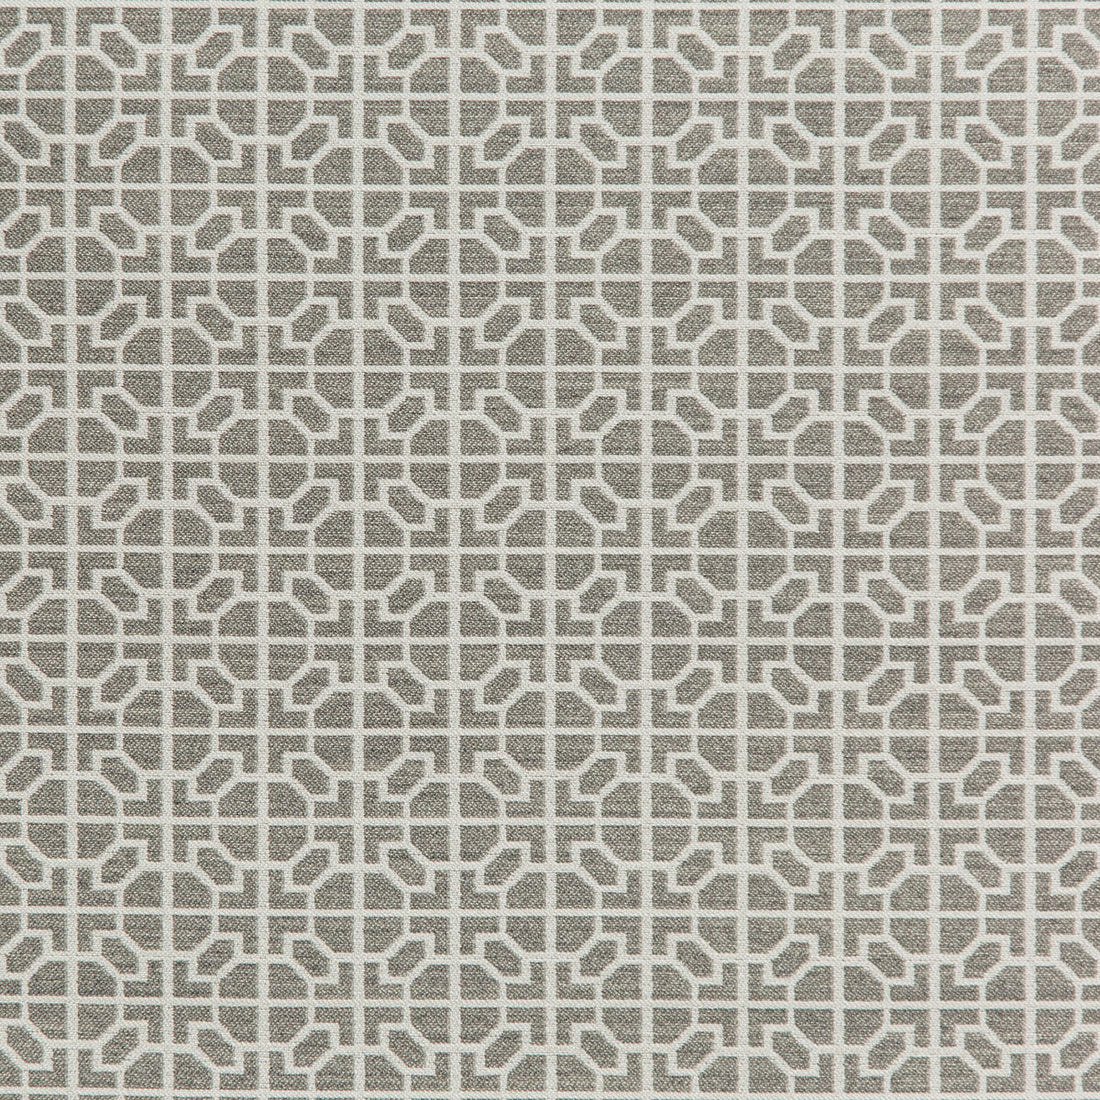 Raia fabric in stone color - pattern 35820.11.0 - by Kravet Design in the Indoor / Outdoor collection